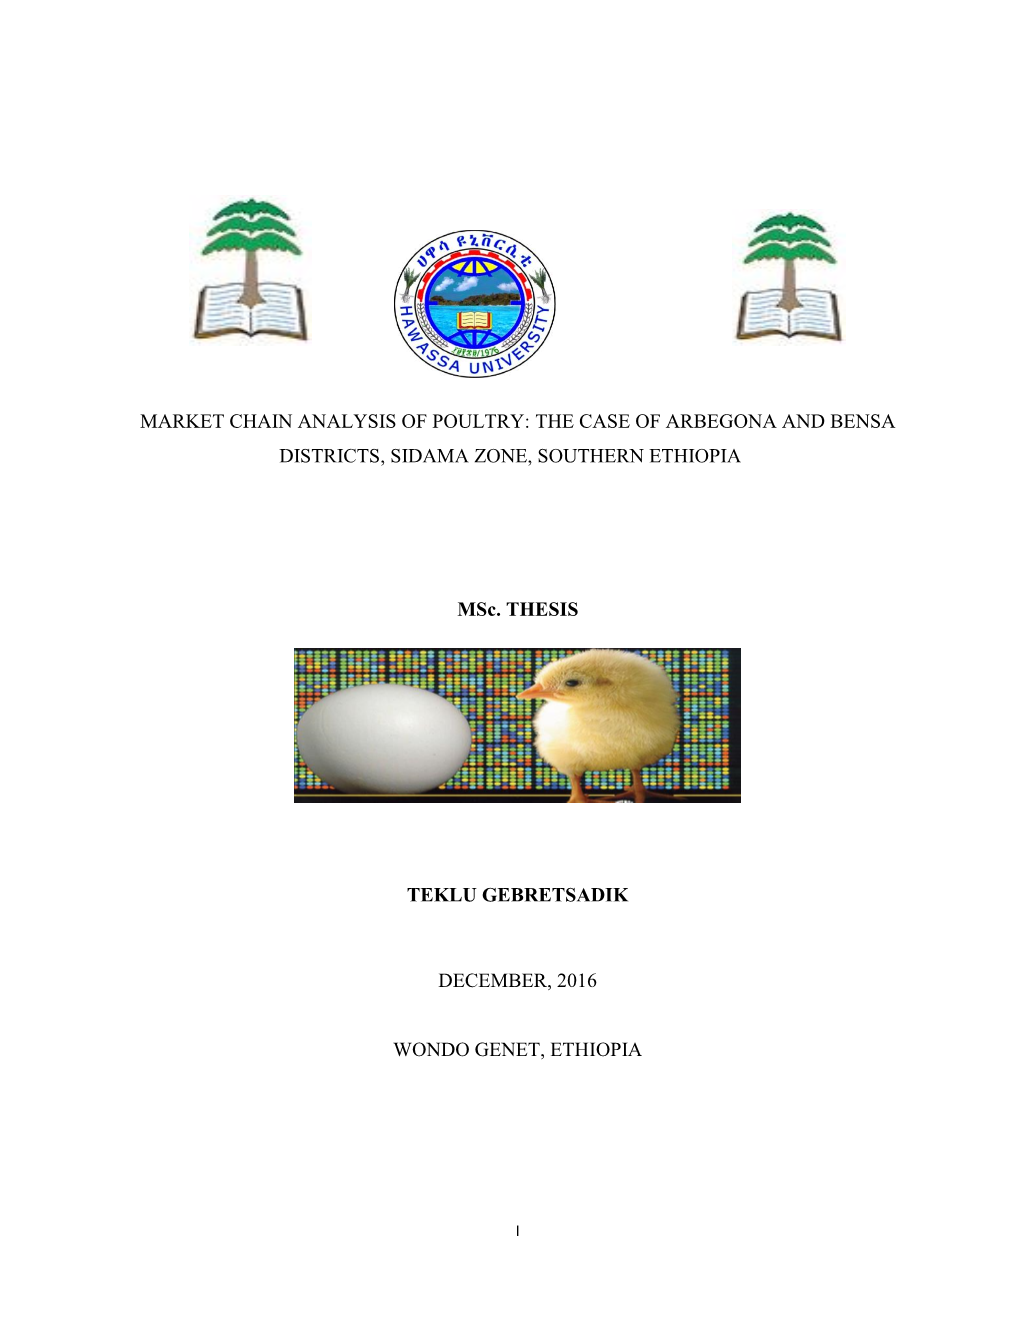 Market Chain Analysis of Poultry: the Case of Arbegona and Bensa Districts, Sidama Zone, Southern Ethiopia